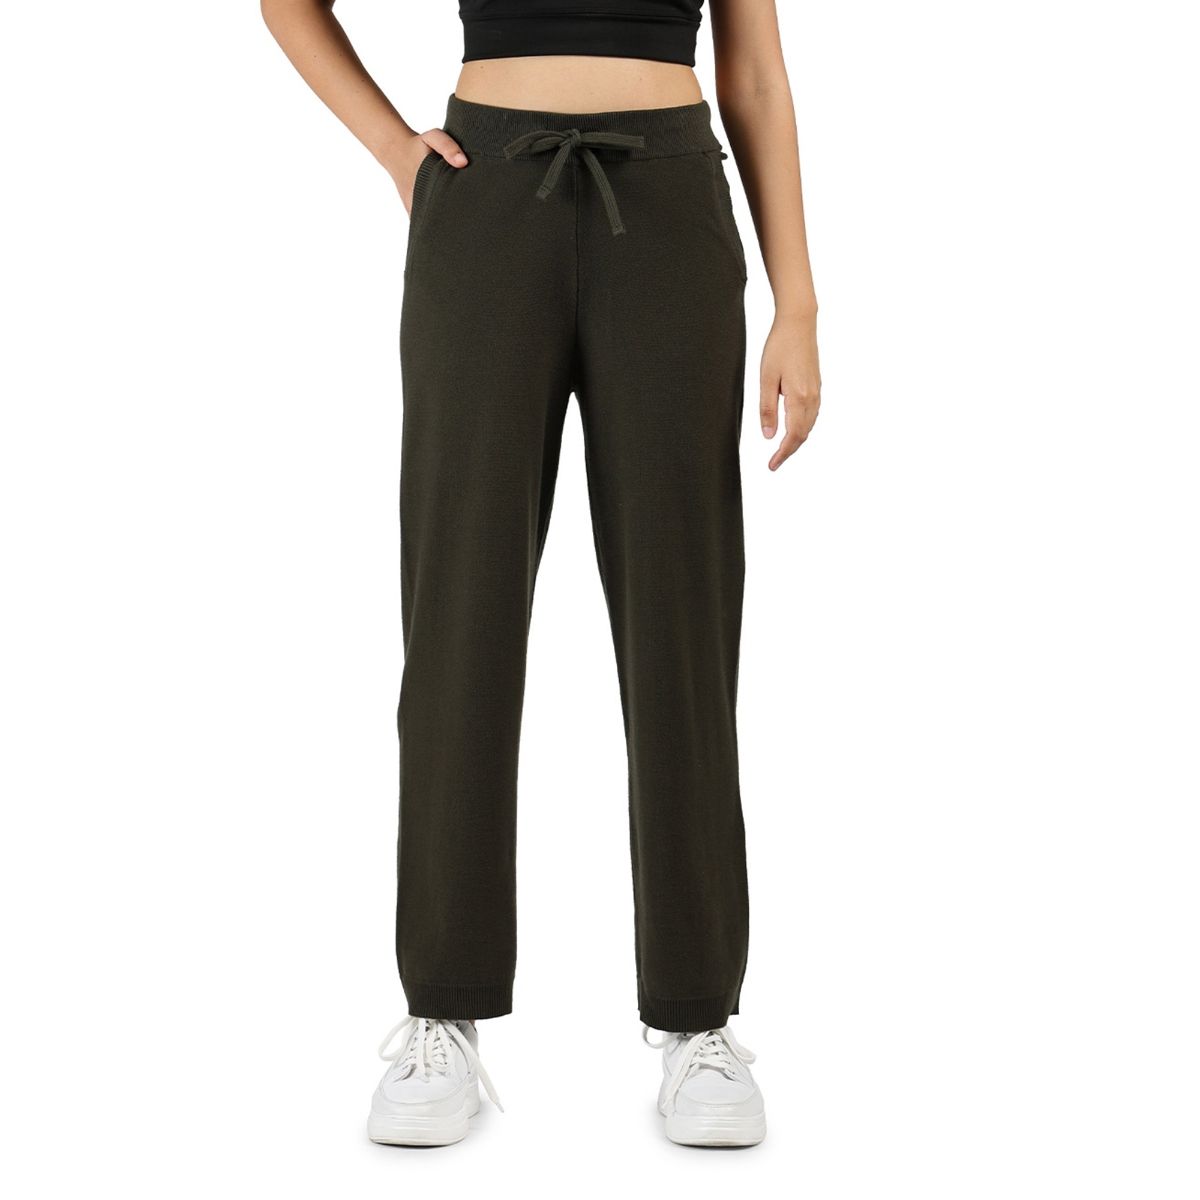 Buy Bliss Club Women Ivory Move All Day Pants Tall with Adjustable  Drawstring Online